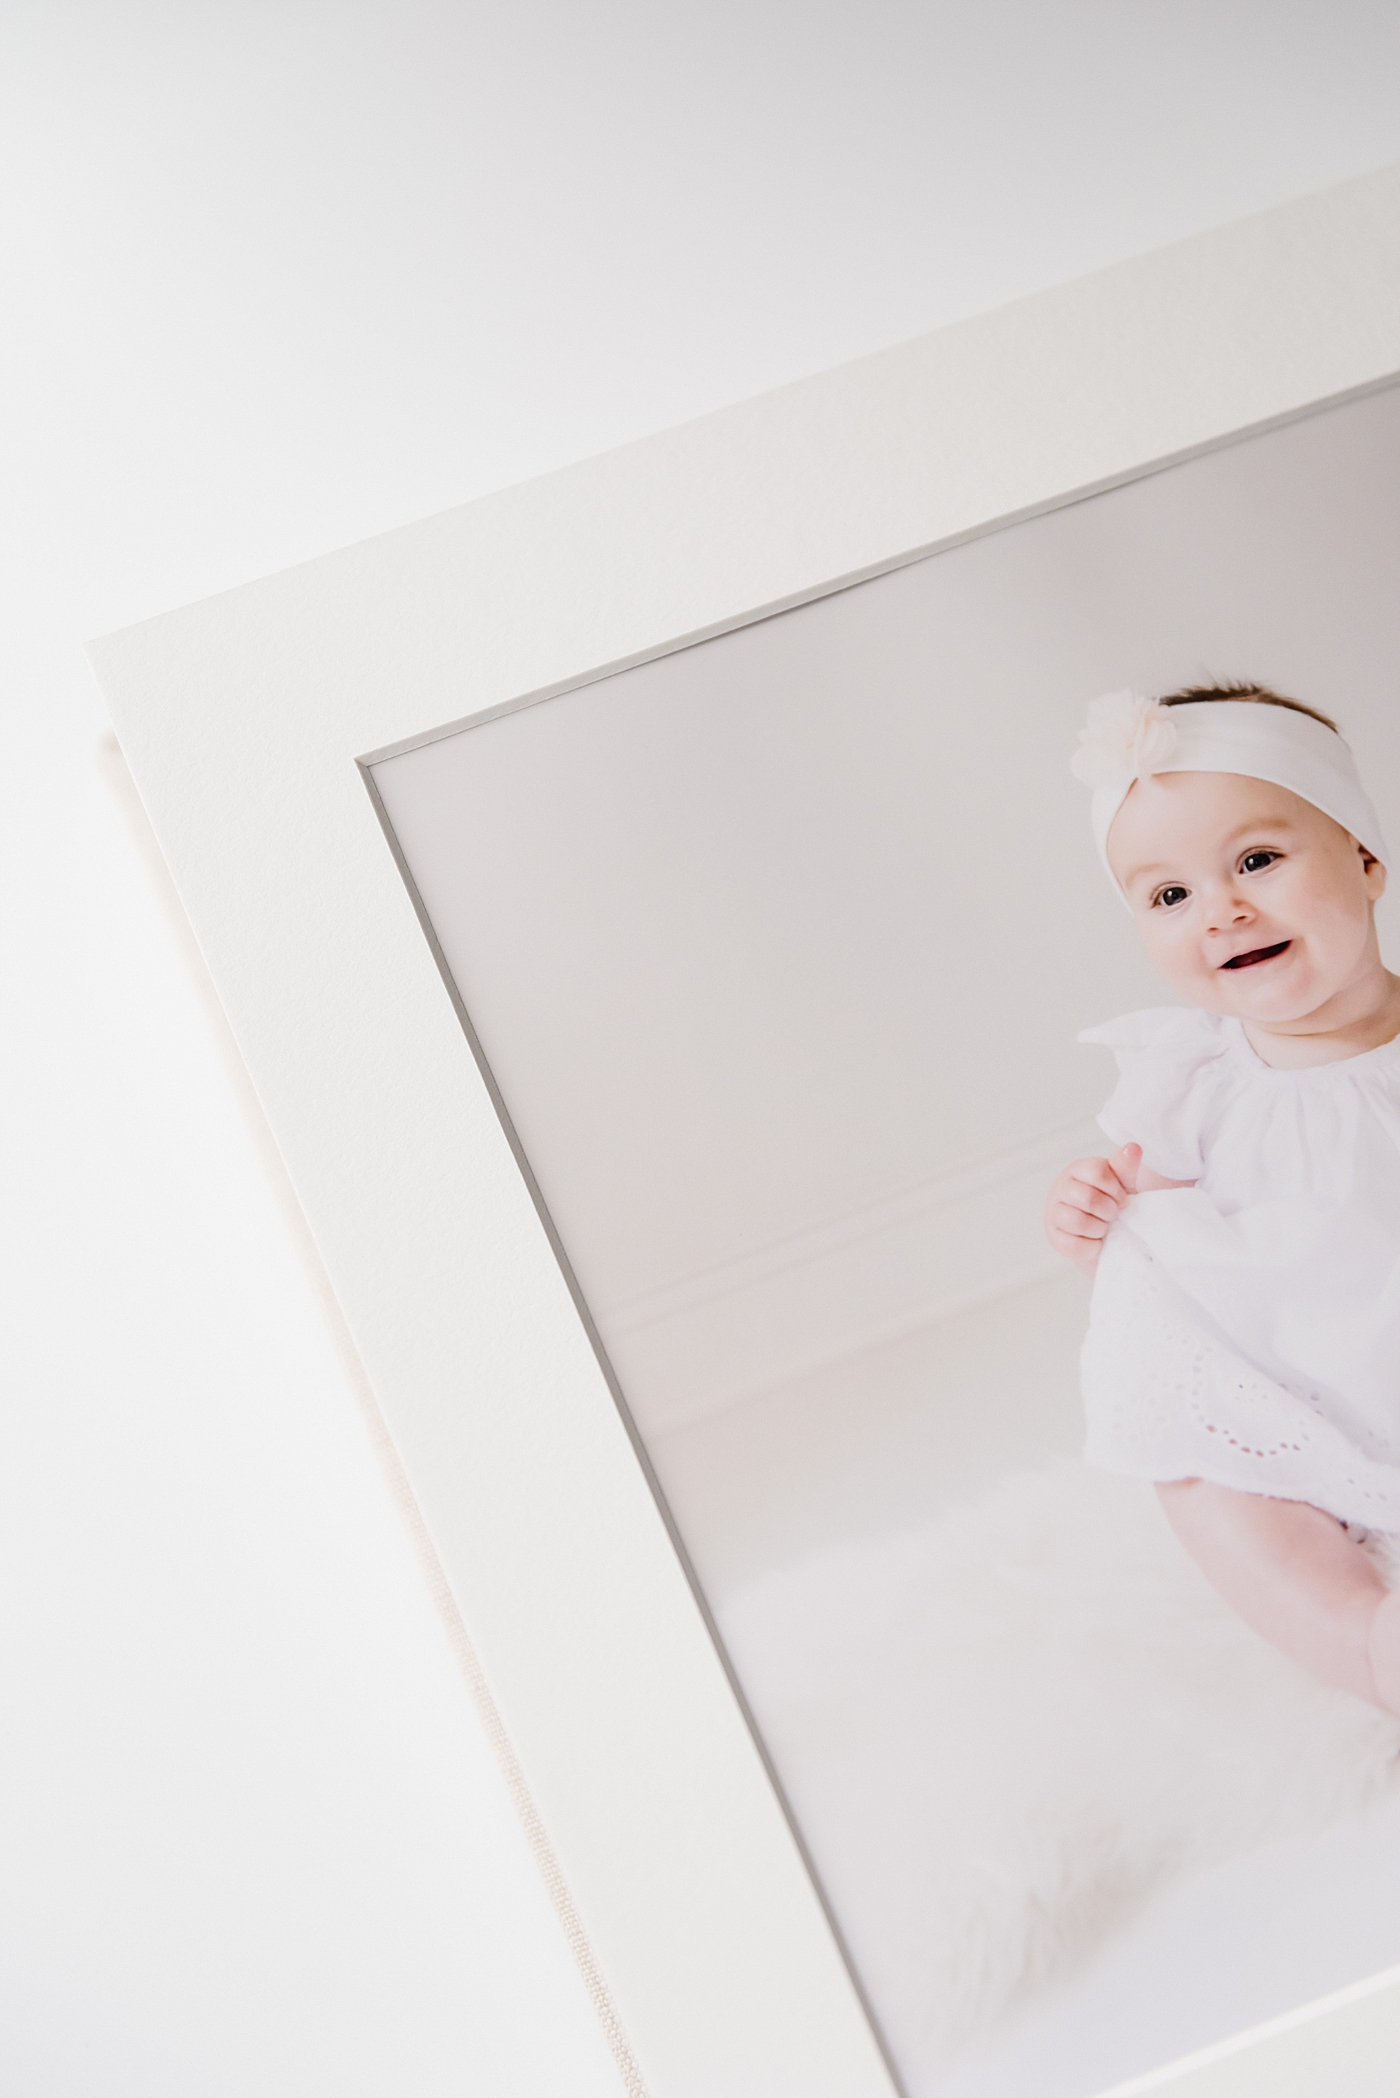 Details of matted albums | Heirloom Albums with Charlotte Newborn Photographer Anna Wisjo 